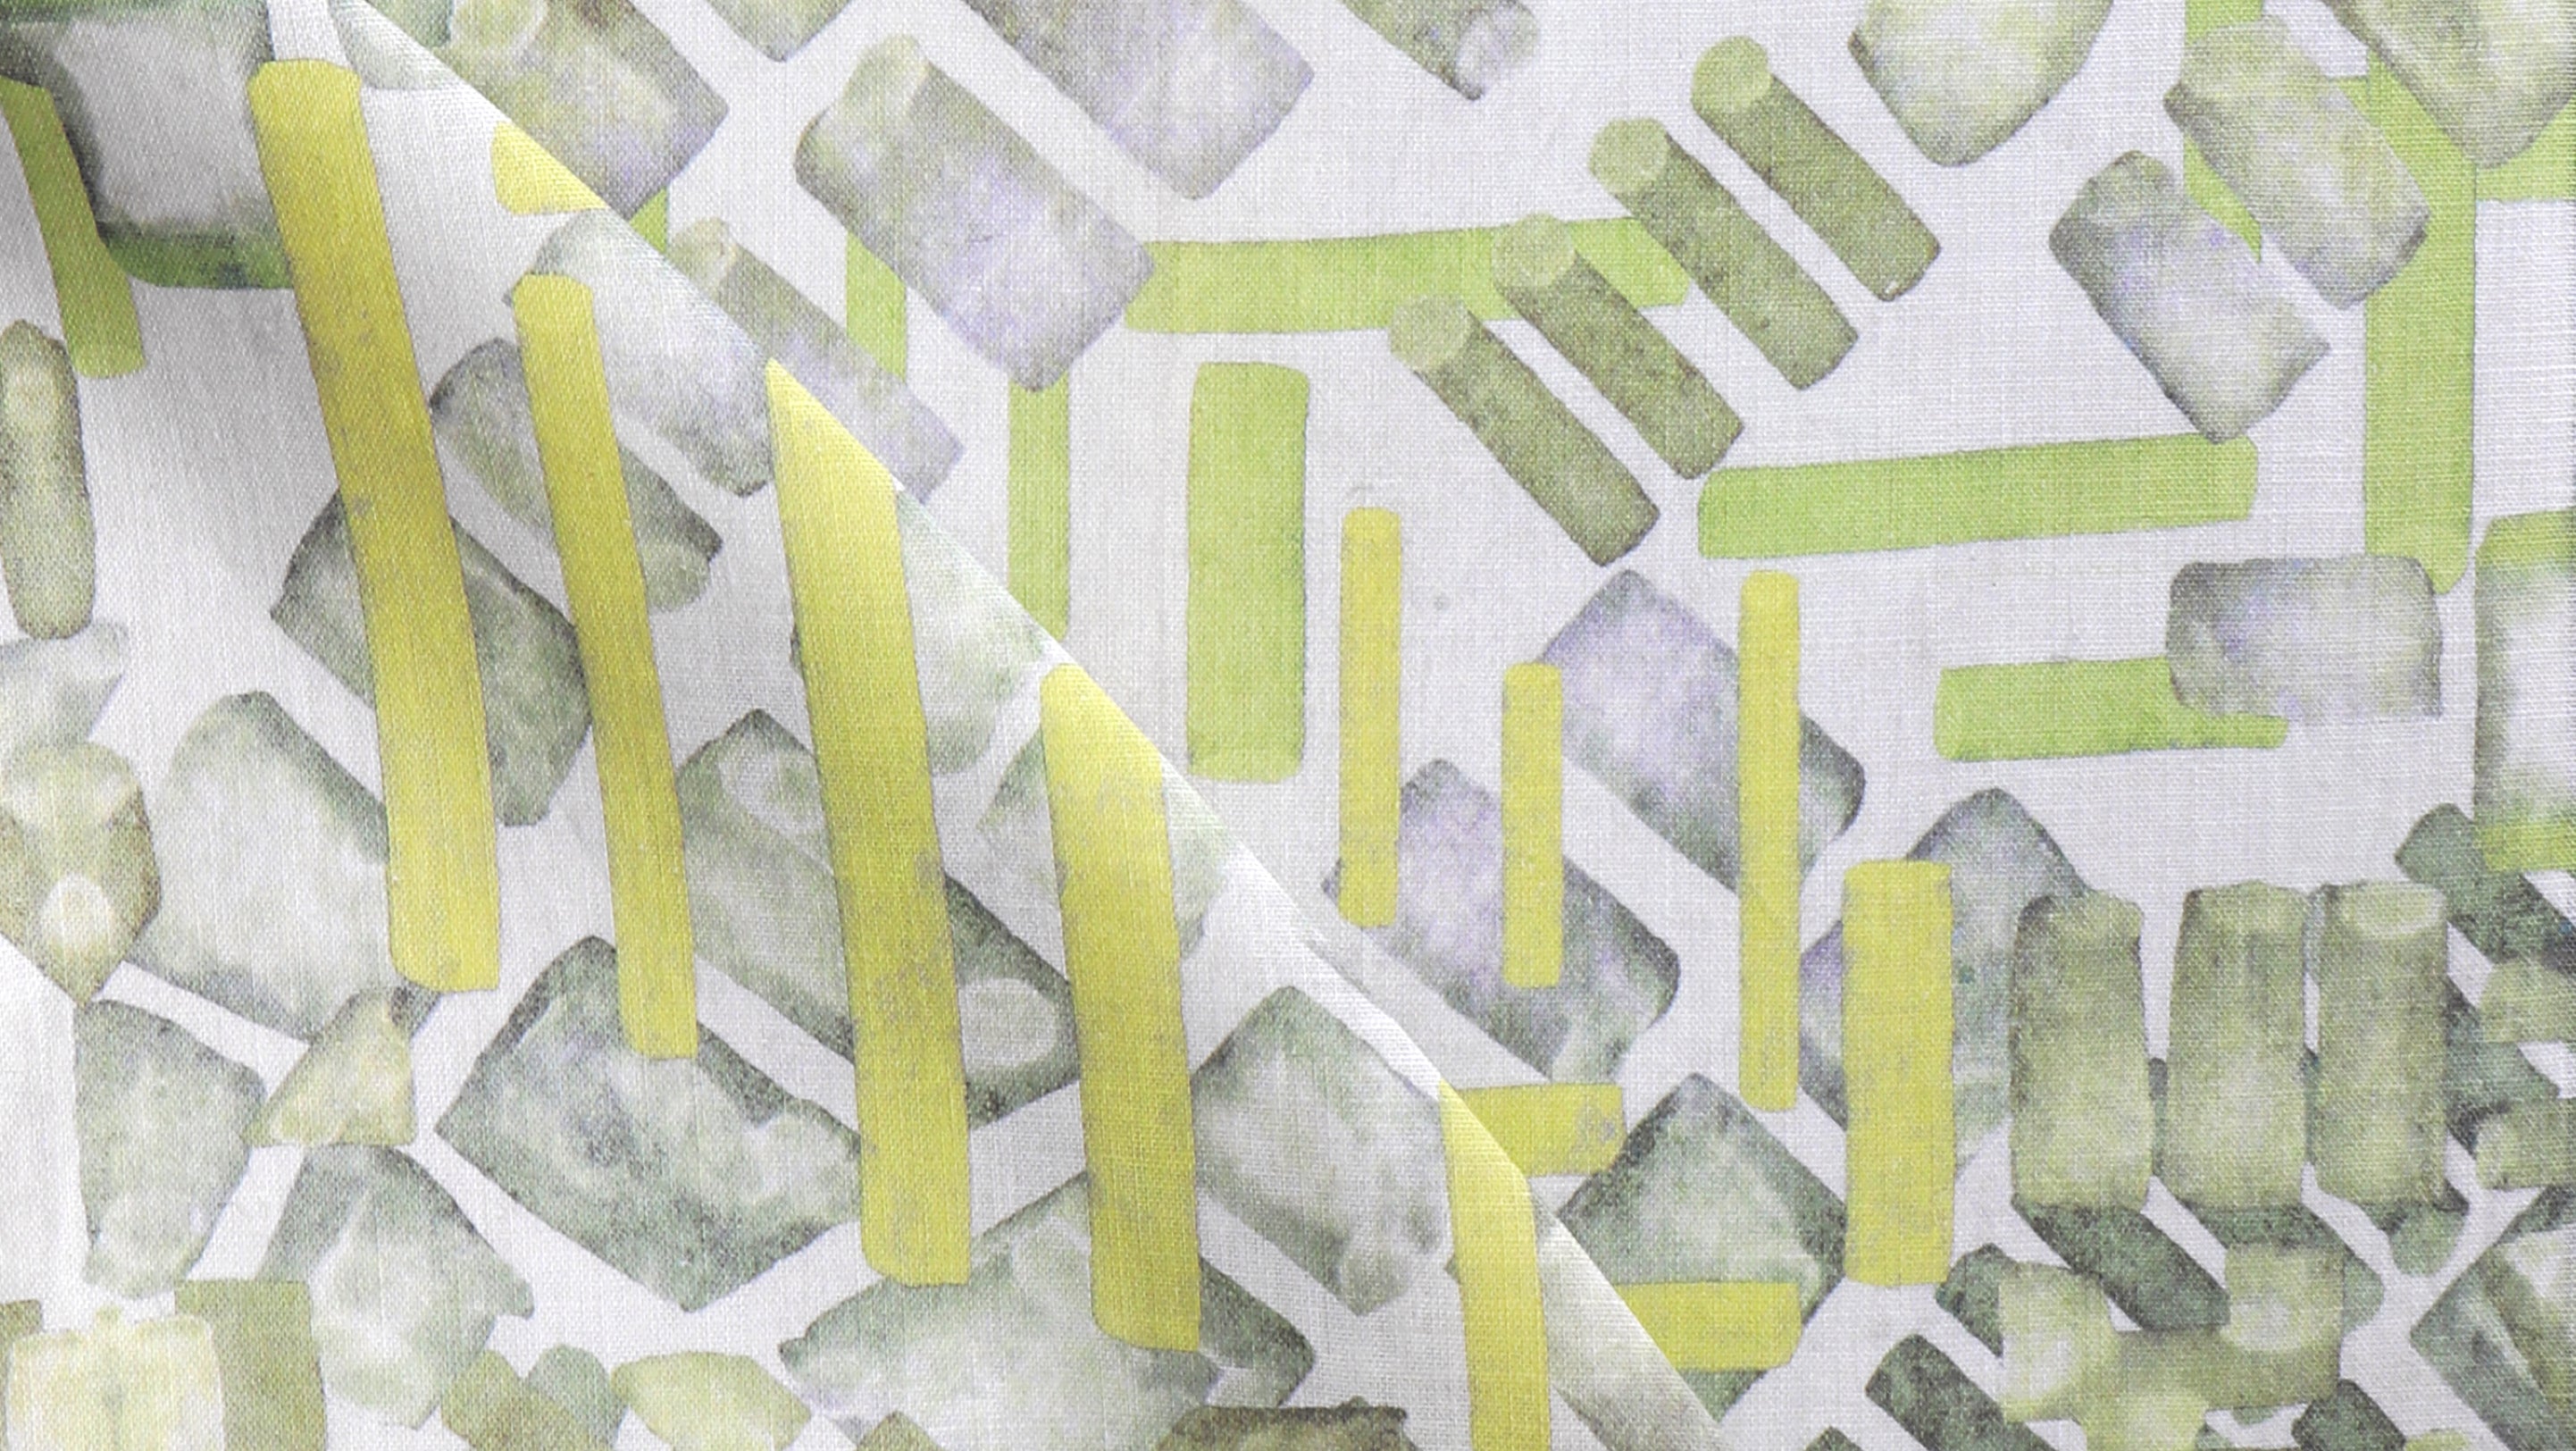 A close up of a green and yellow abstract pattern on white fabric